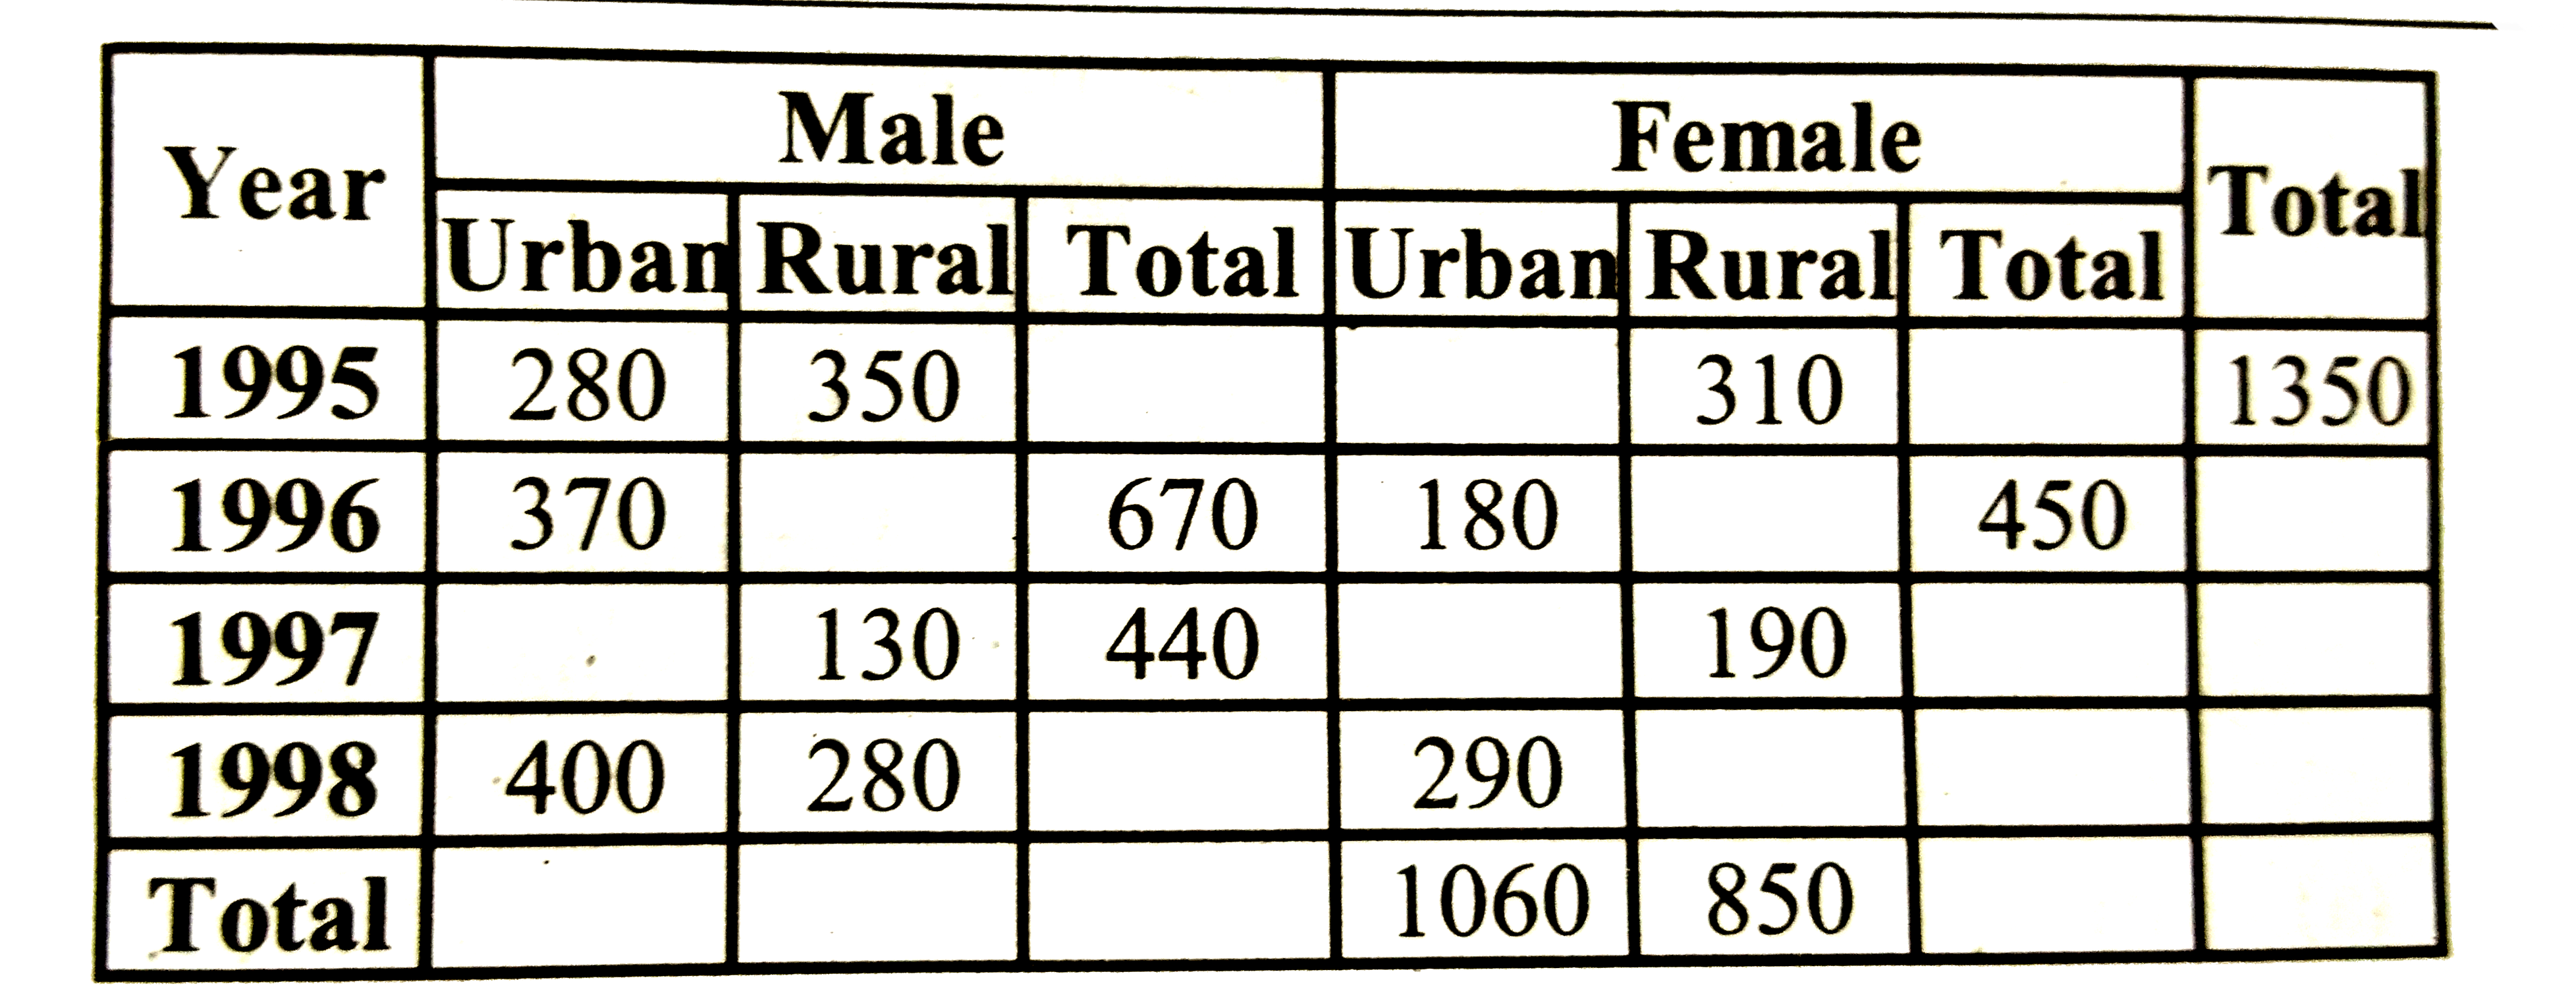 What is the difference between the number of females and the number of males in the year 1995?